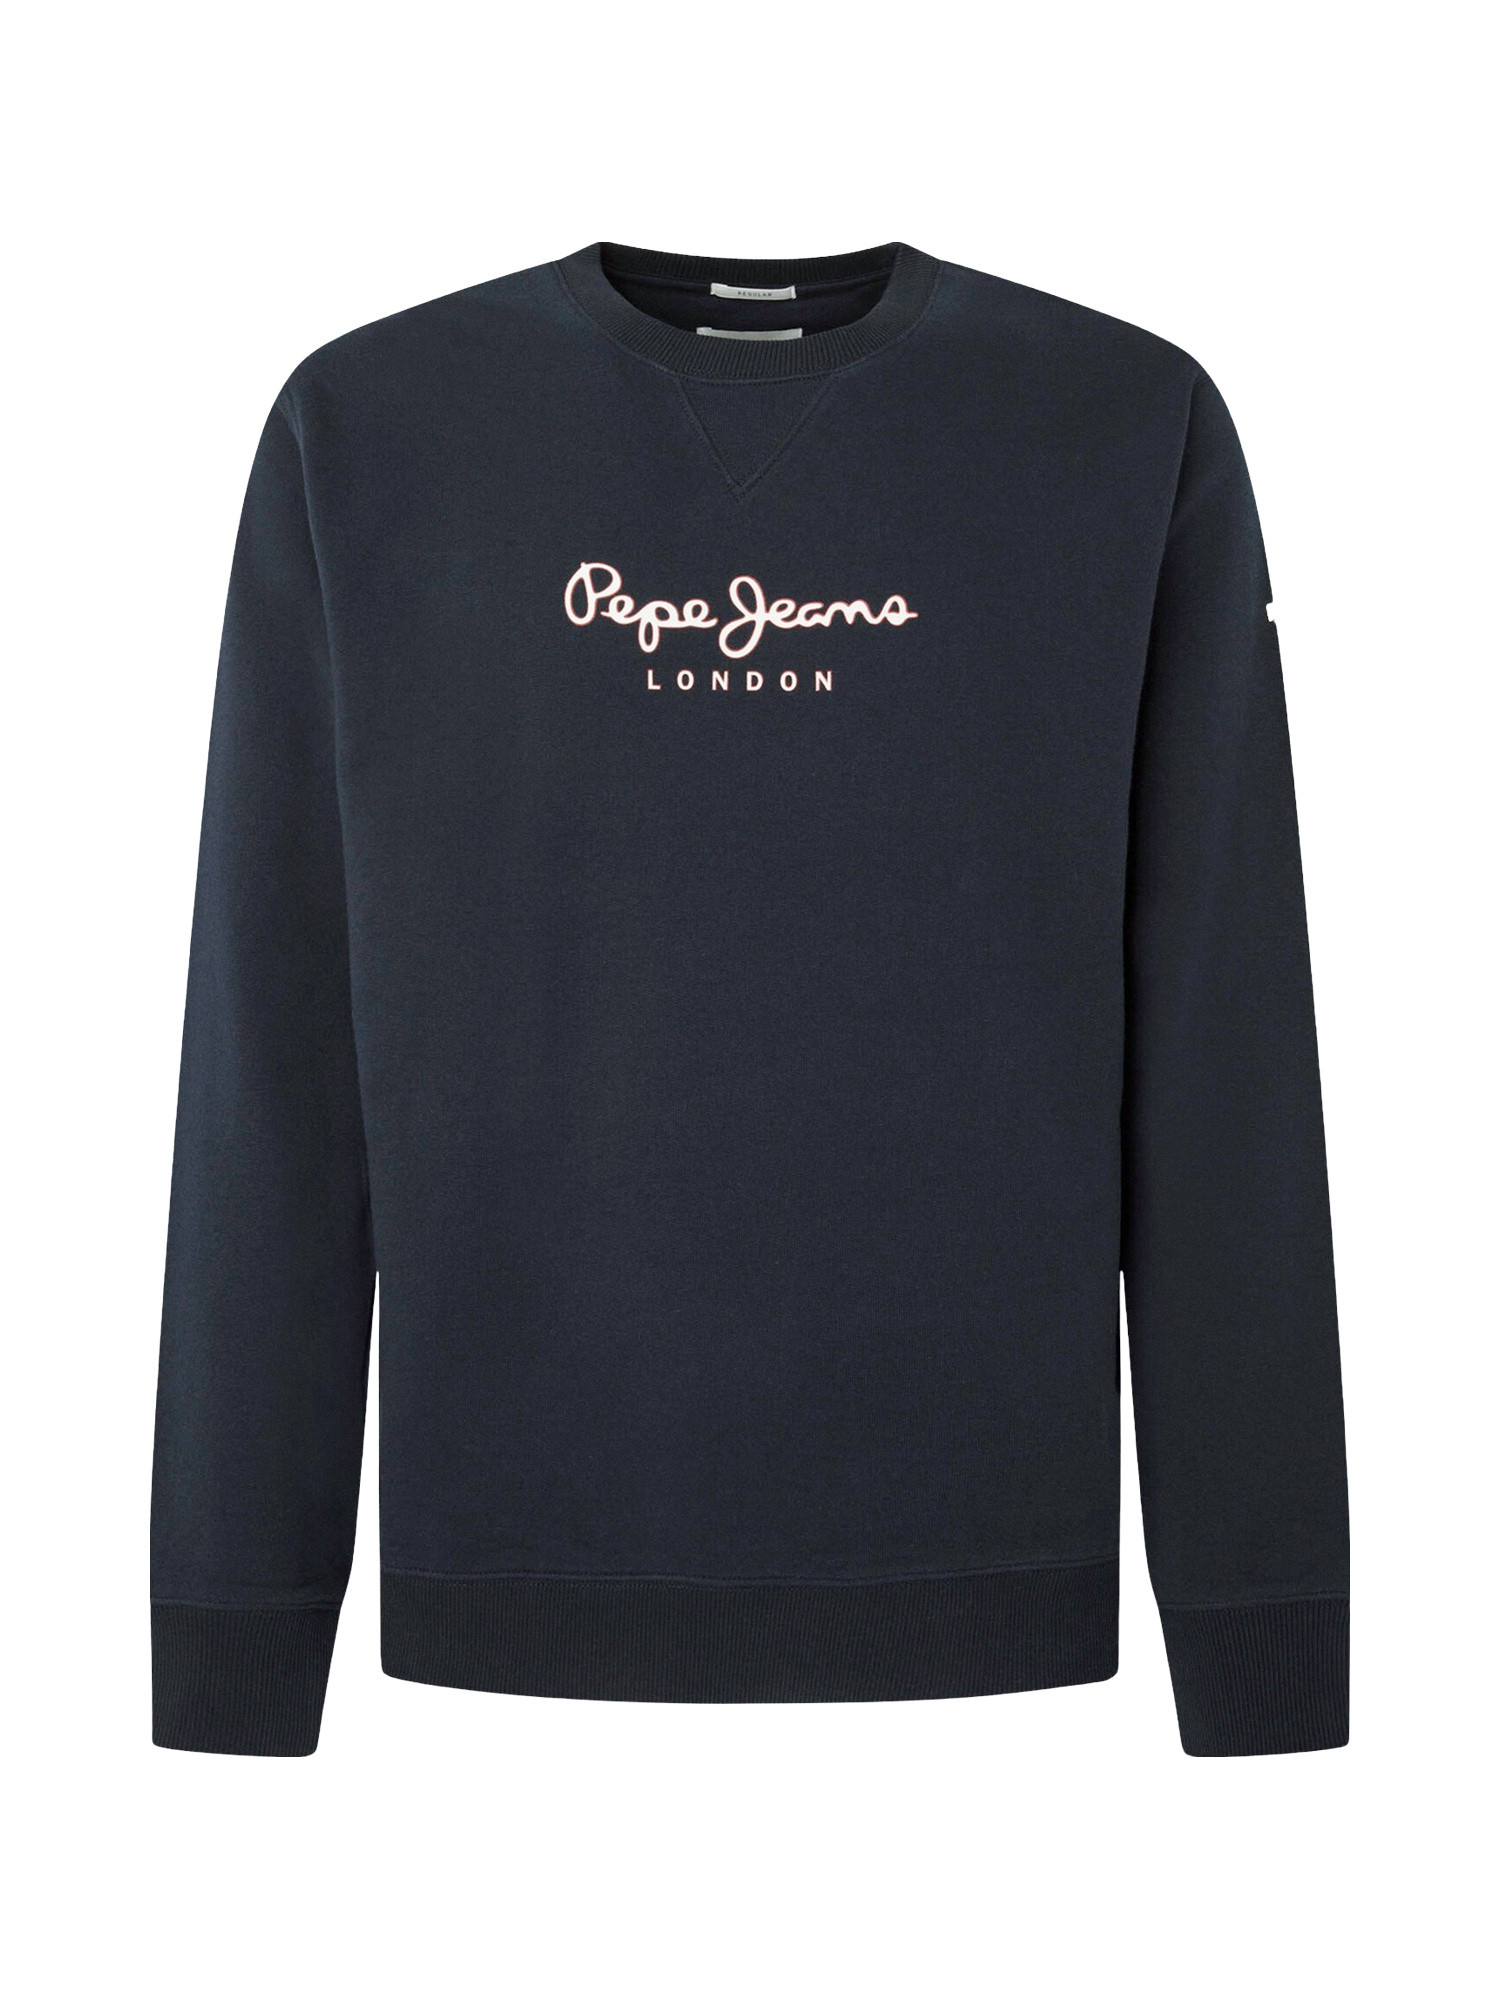 Pepe Jeans - Felpa con logo in cotone, Blu scuro, large image number 0